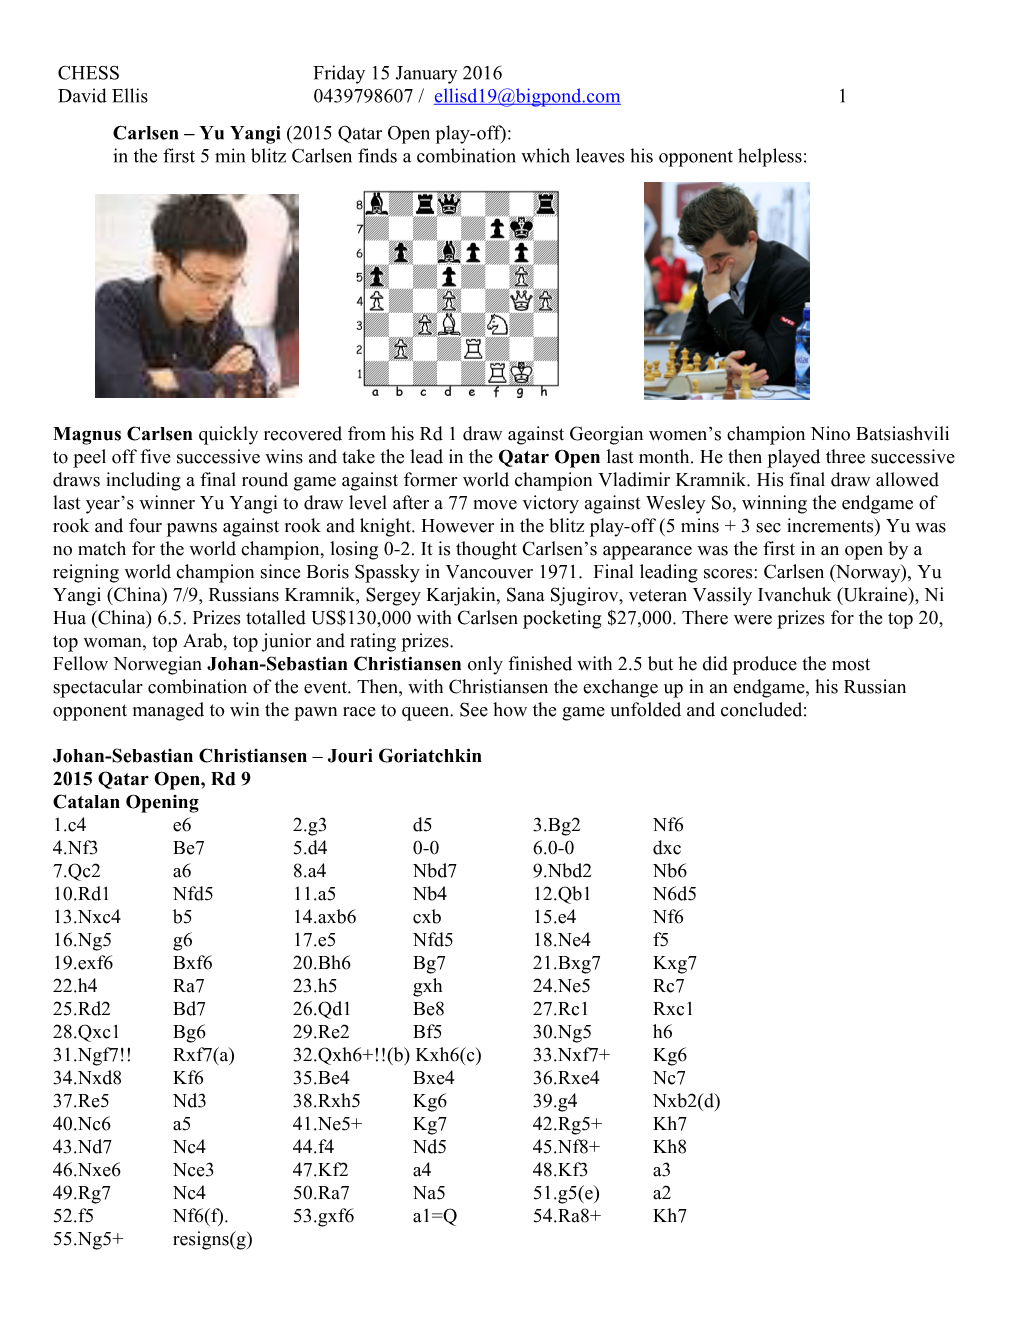 Looking Through Various English-Speaking Chess Web Sites, I Am Always on the Look-Out For s4